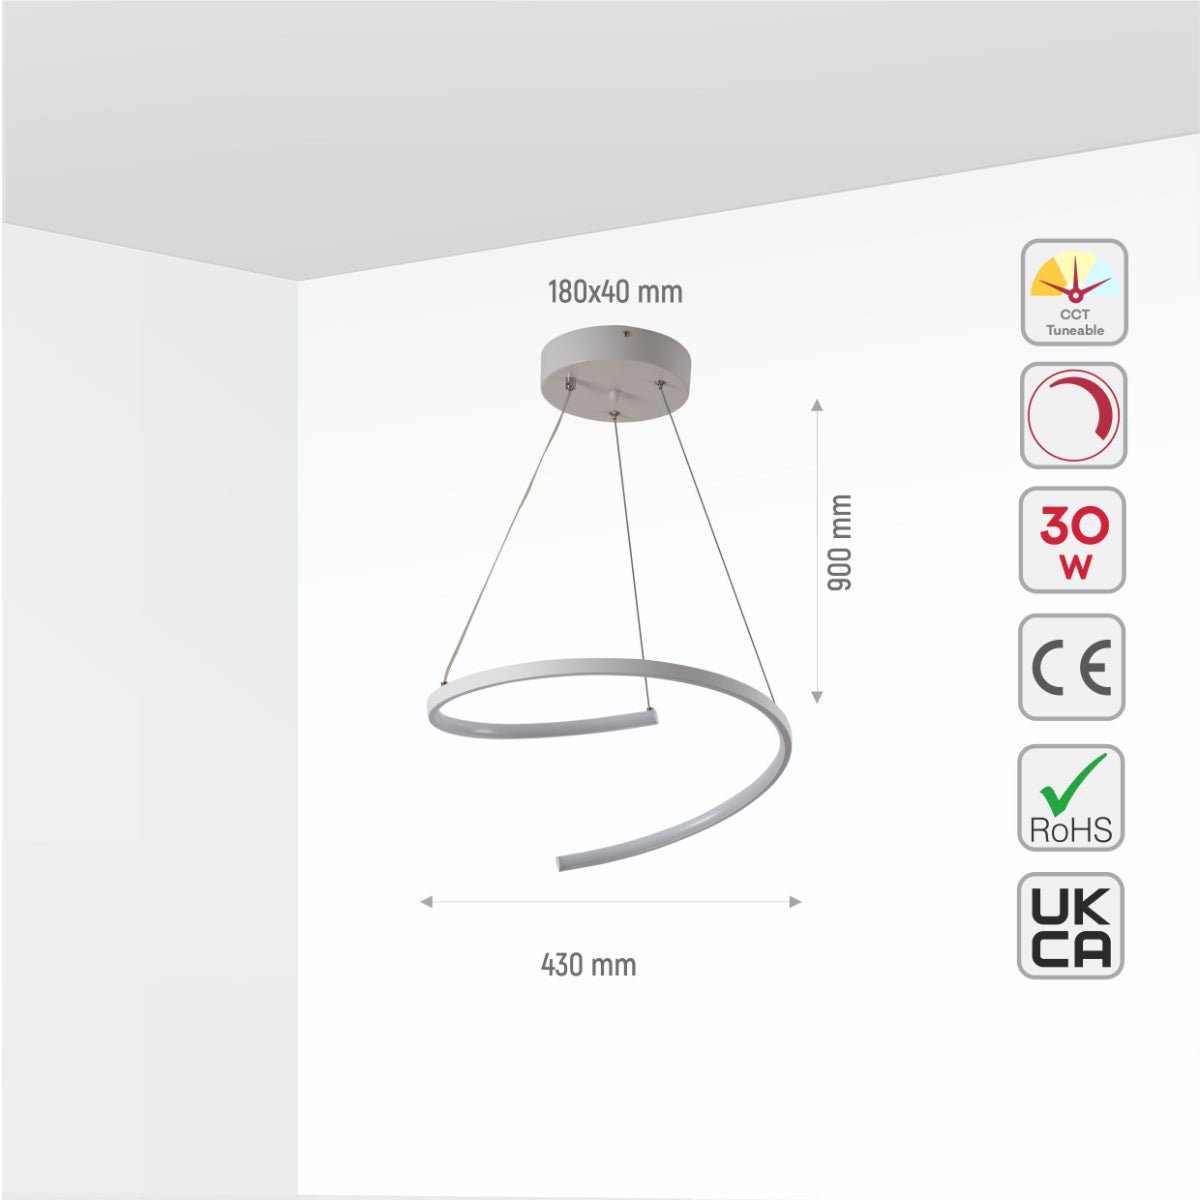 Size and specs of LED Spiral White Finishing 30W CCT Change Dimmable Contemporary Nordic Scandinavian Pendant Ceiling Light with Remote Control | TEKLED 154-17272